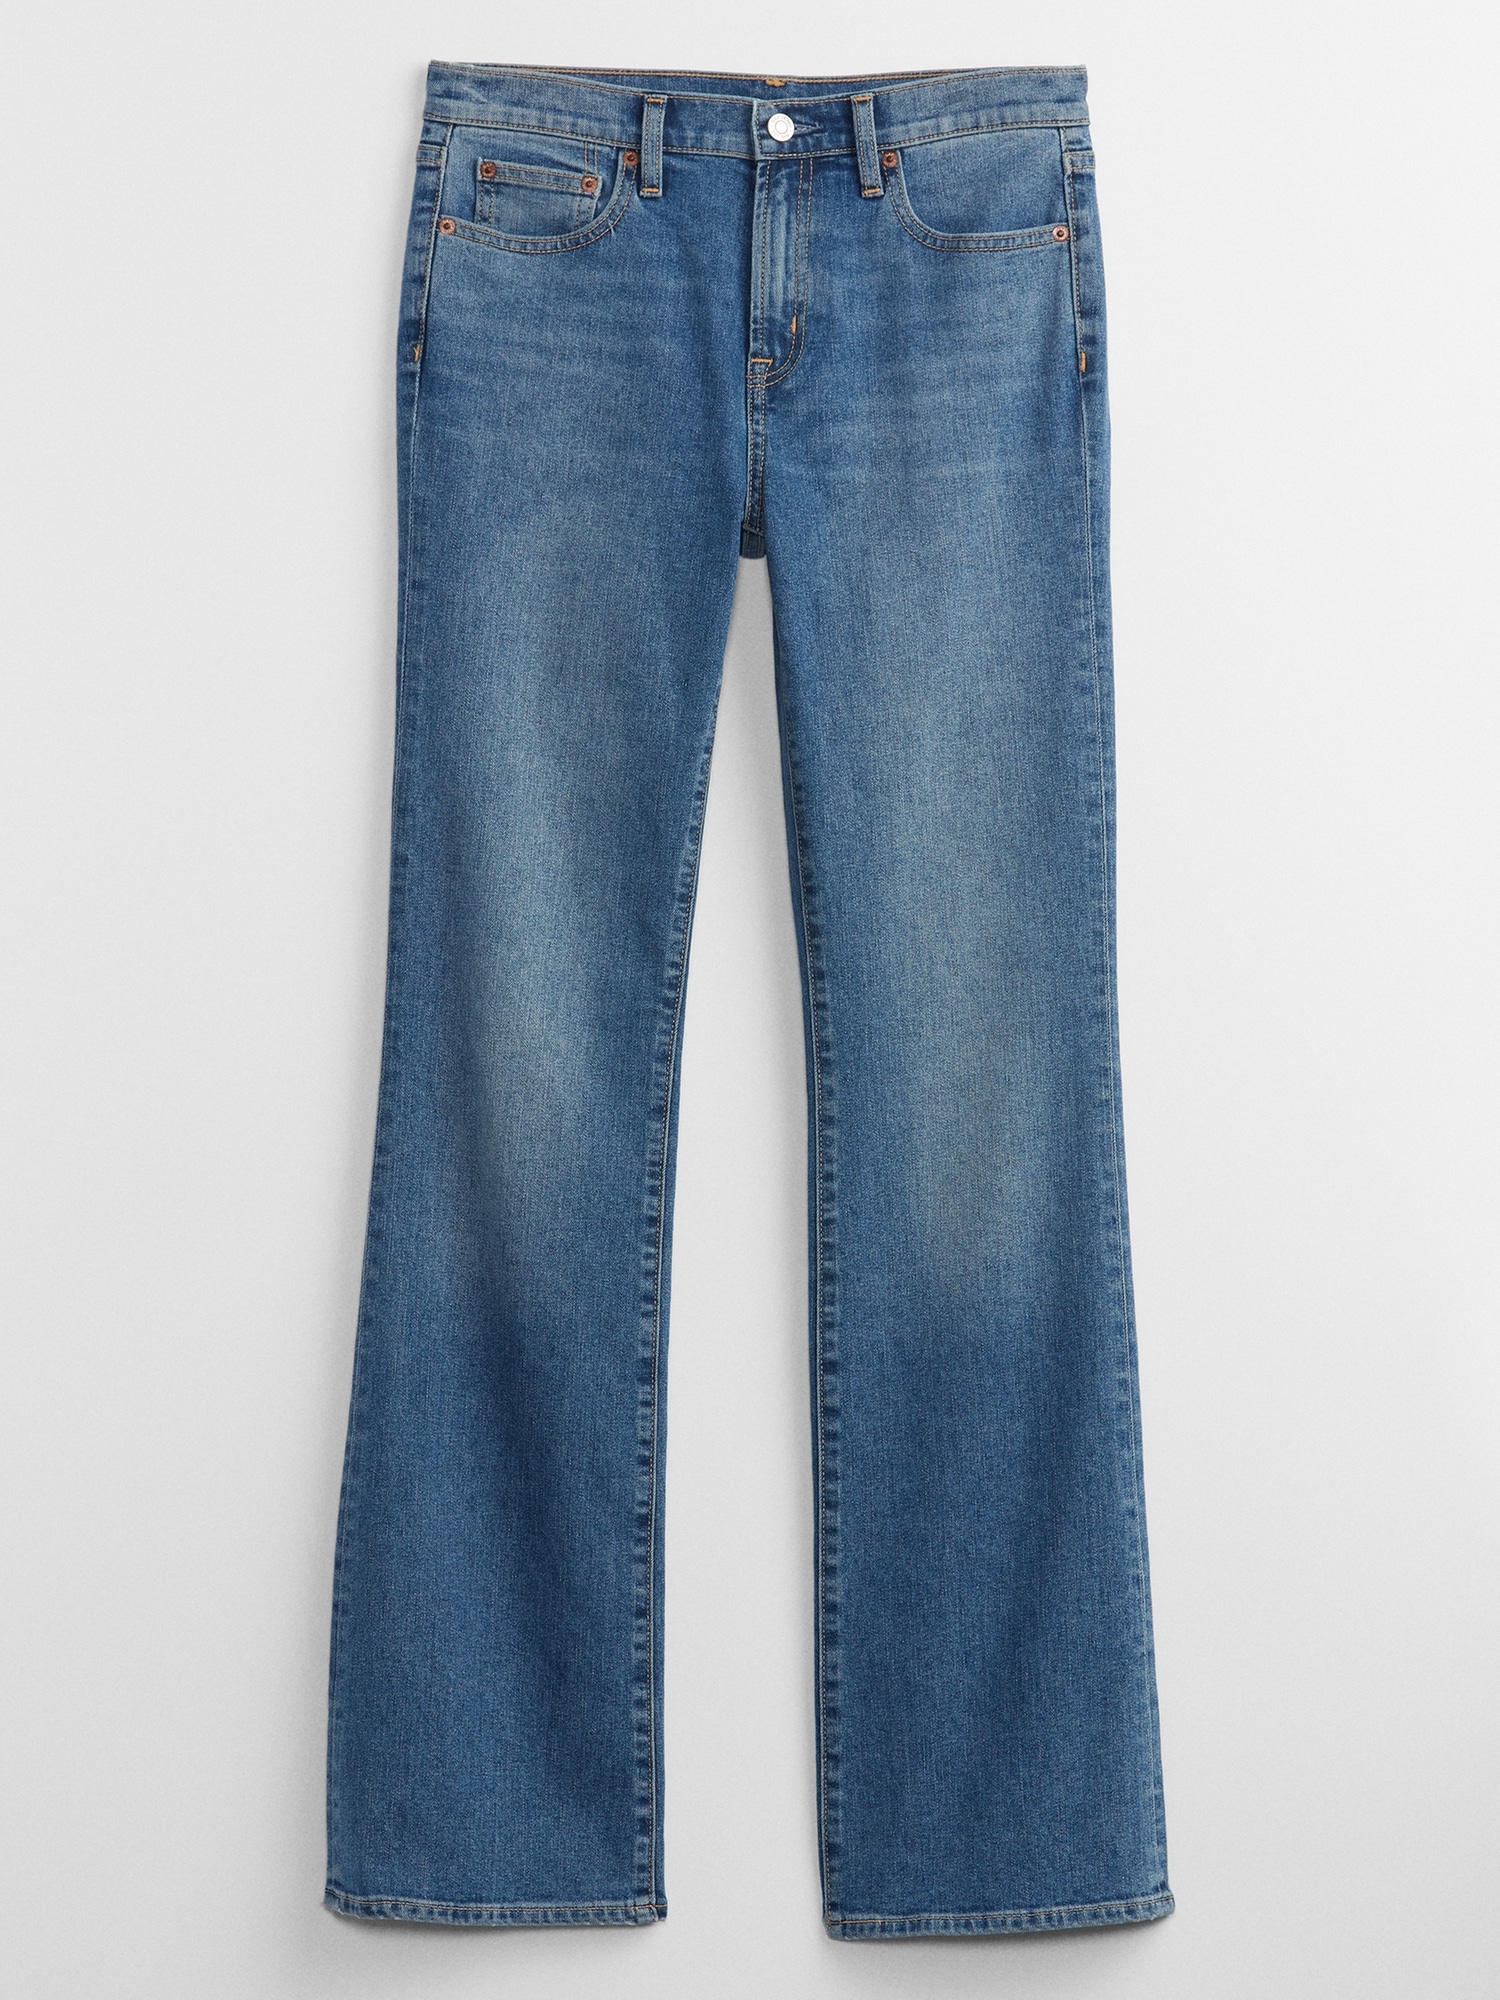 Buy Gap Mid Rise Bootcut Jeans from the Gap online shop